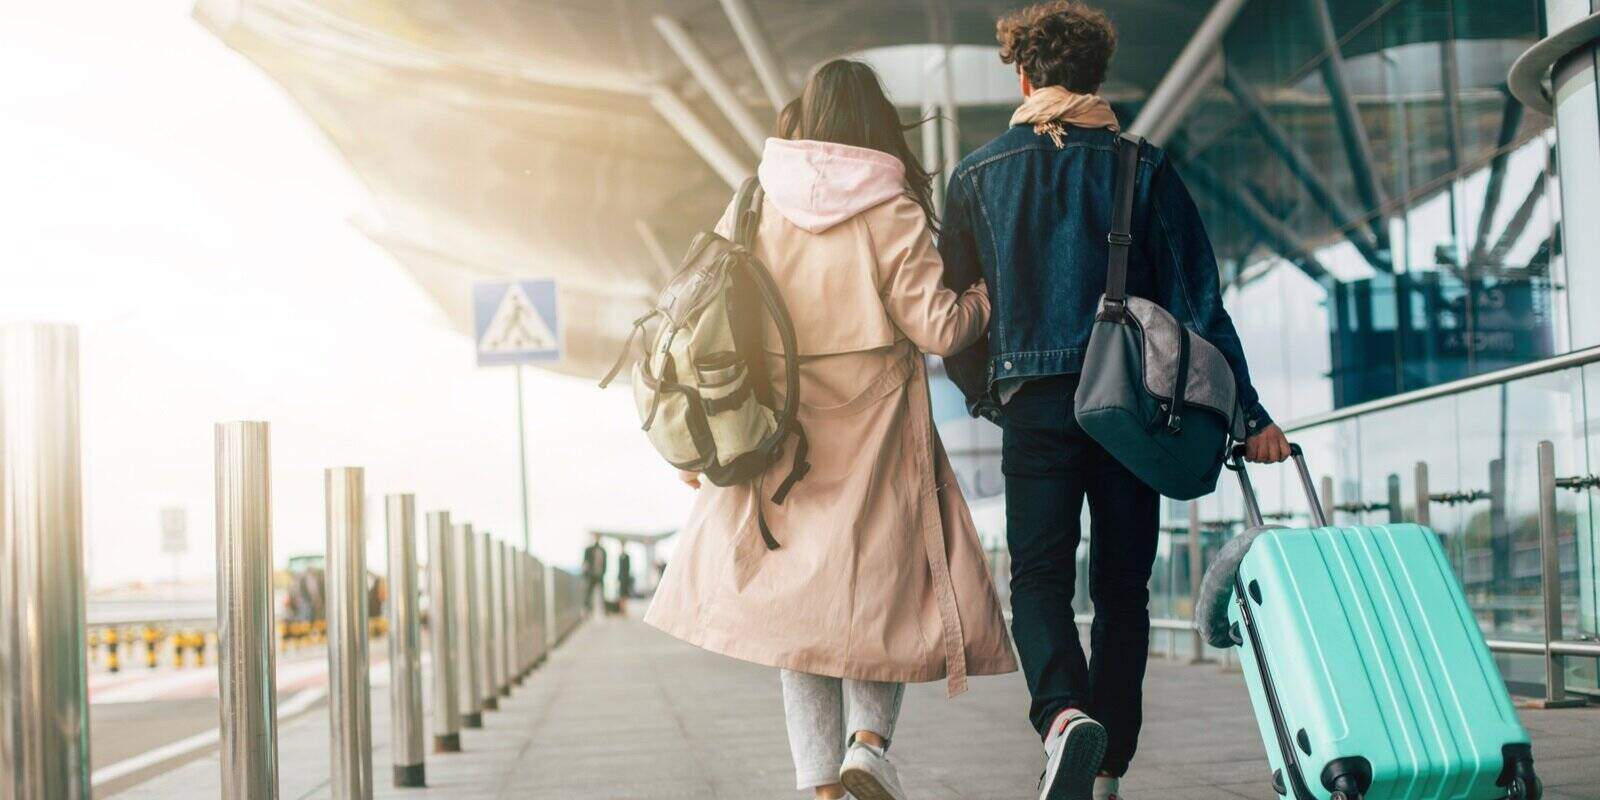 couple walking together out of airport